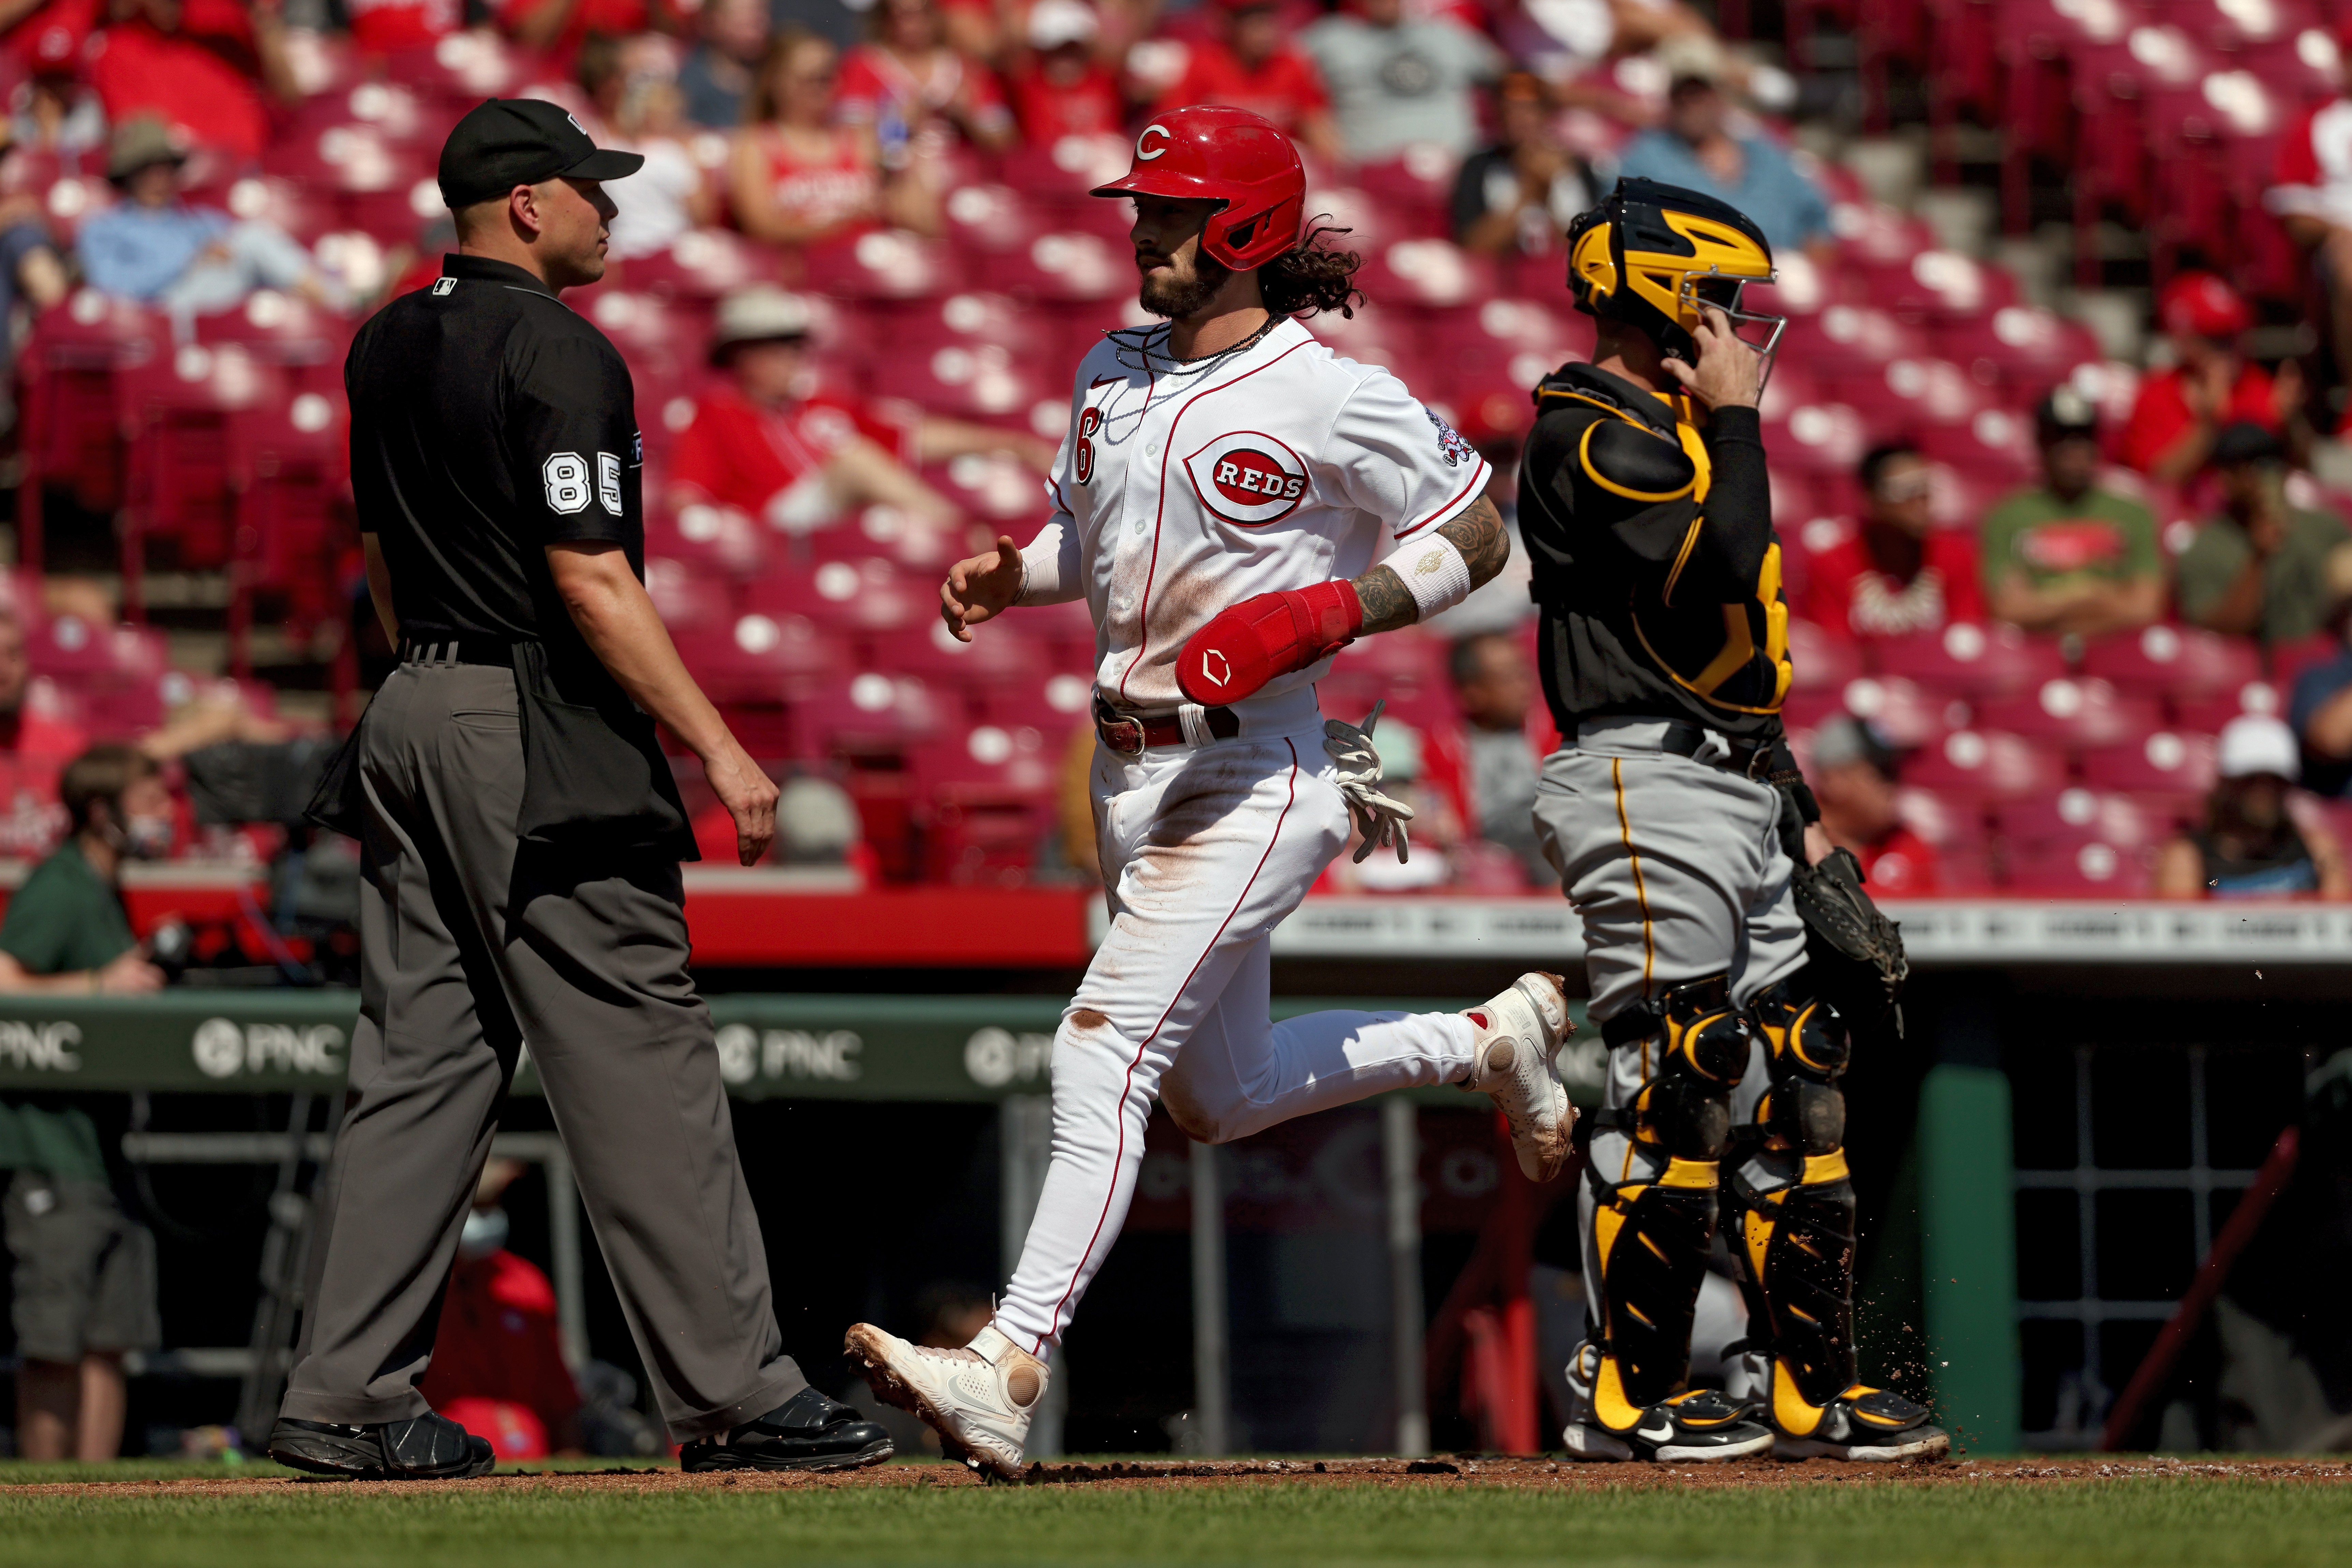 Jonathan India #6 of the Cincinnati Reds scores a run in the first inning against the Pittsburgh Pirates at Great American Ball Park on September 27, 2021 in Cincinnati, Ohio.